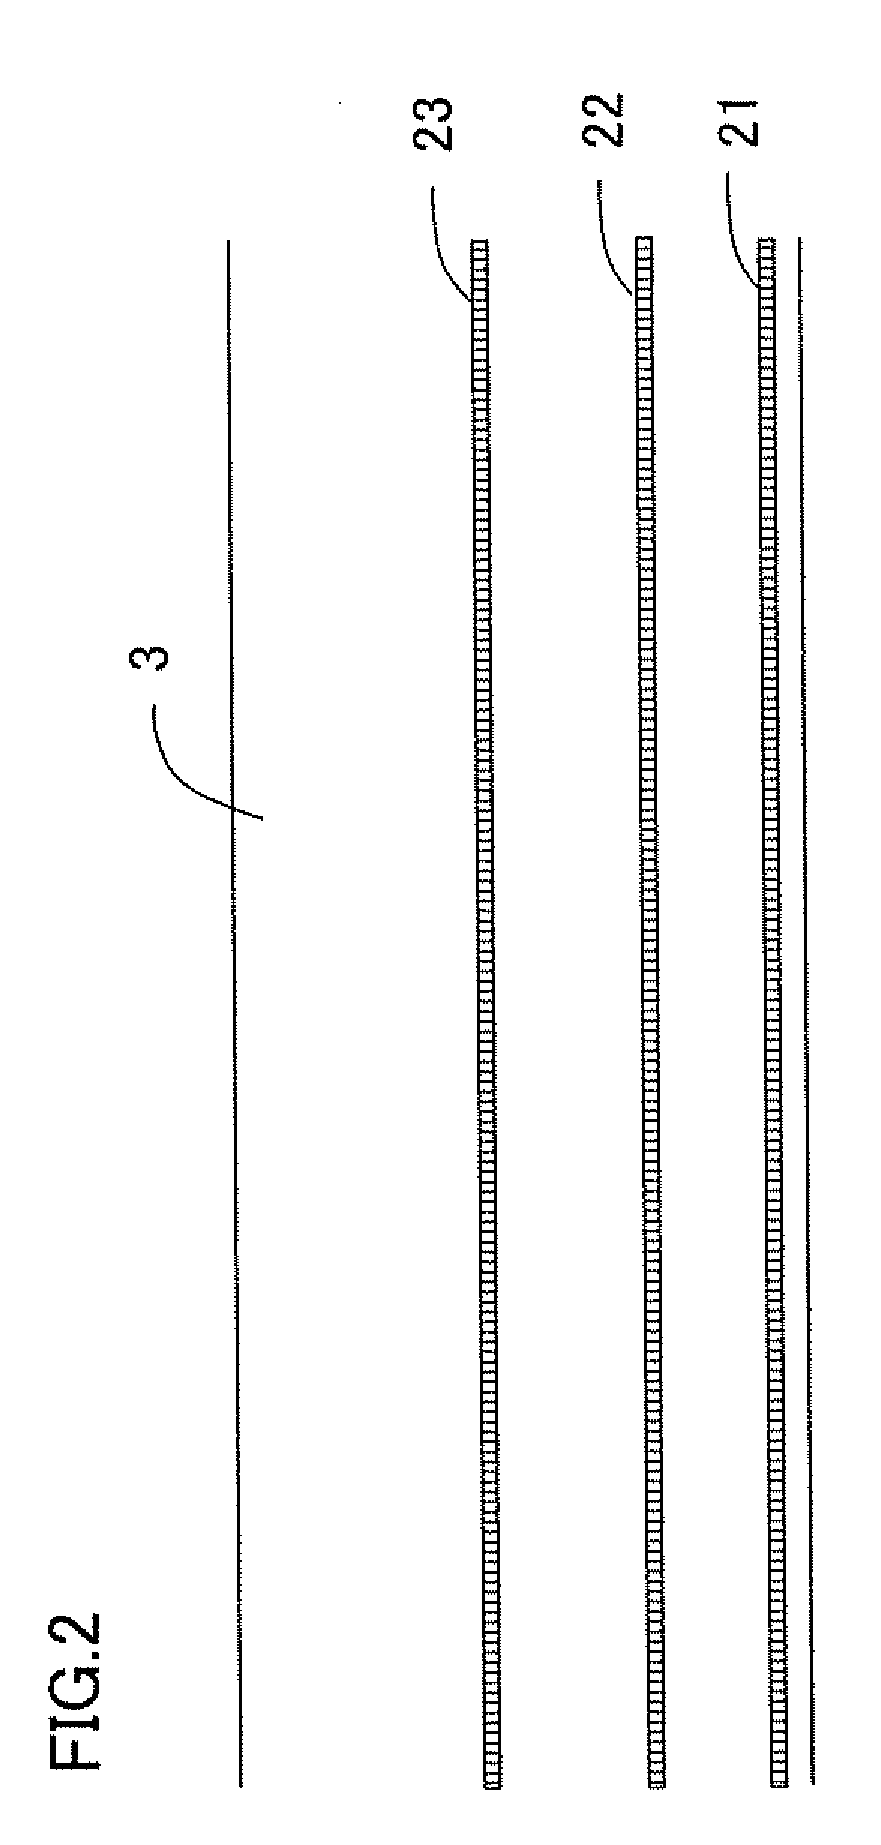 Solid-state image capturing apparatus, method for manufacturing the same, and electronic information device